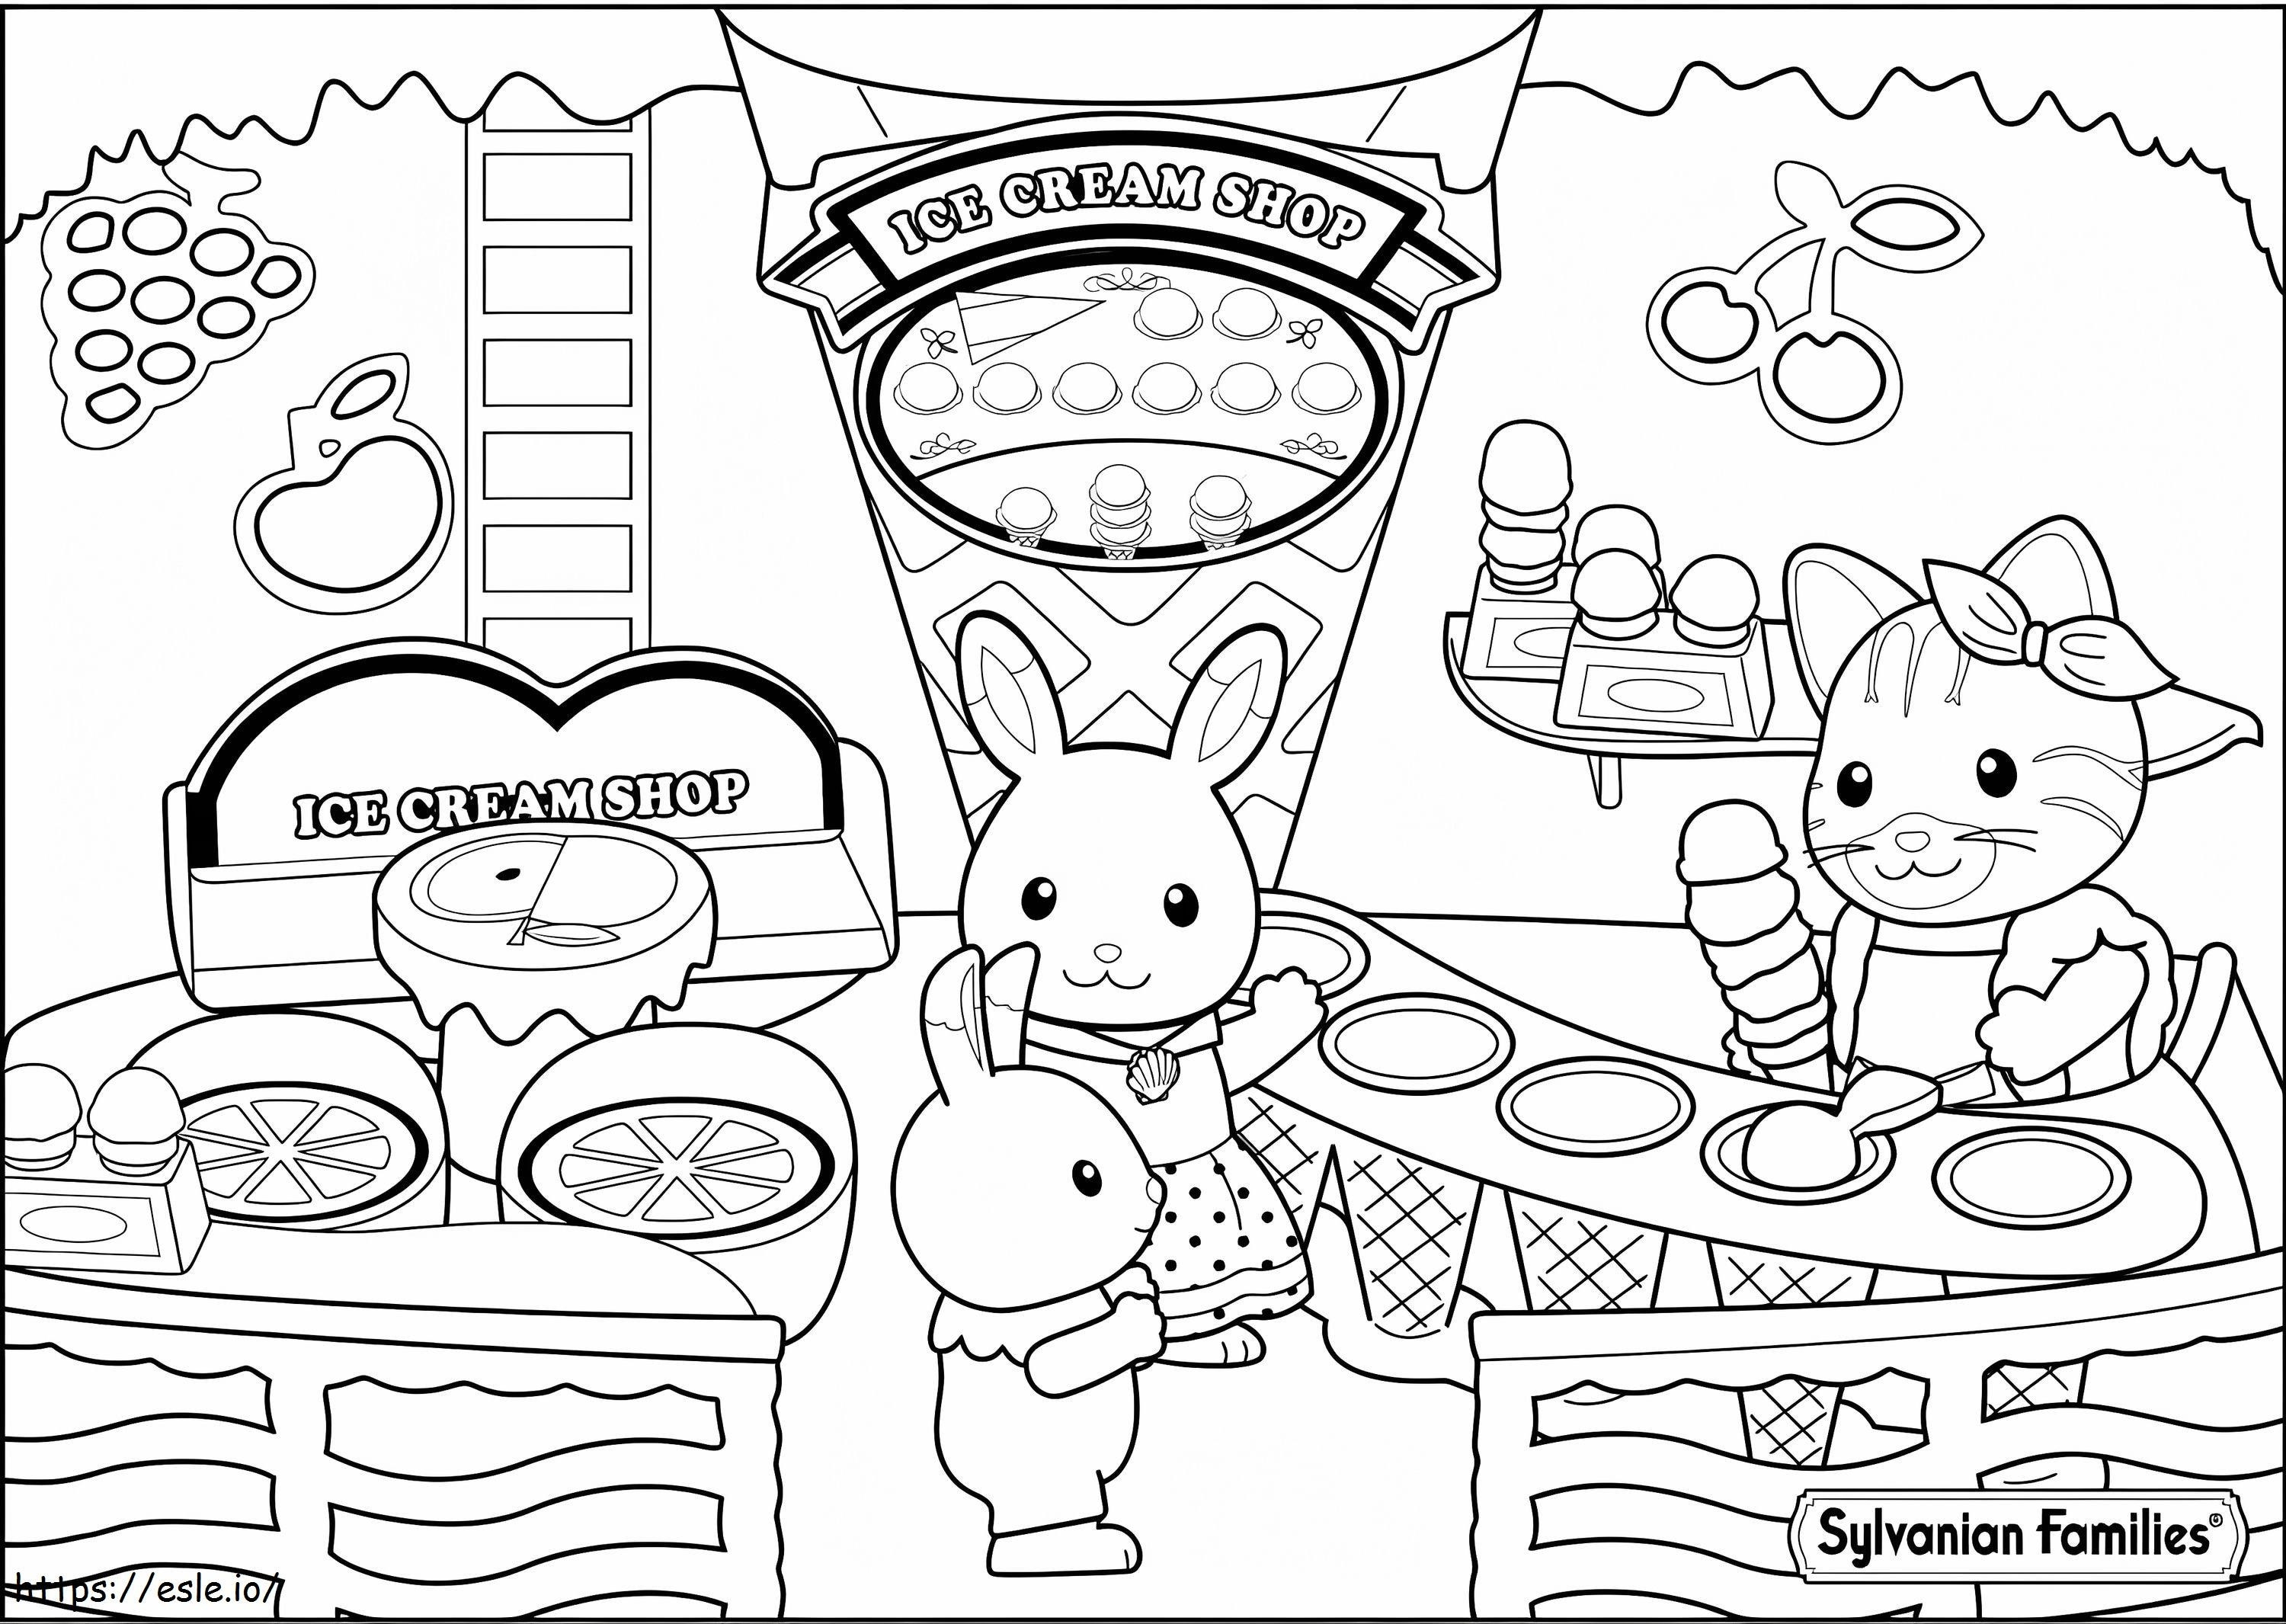 Sylvanian Families 4 coloring page